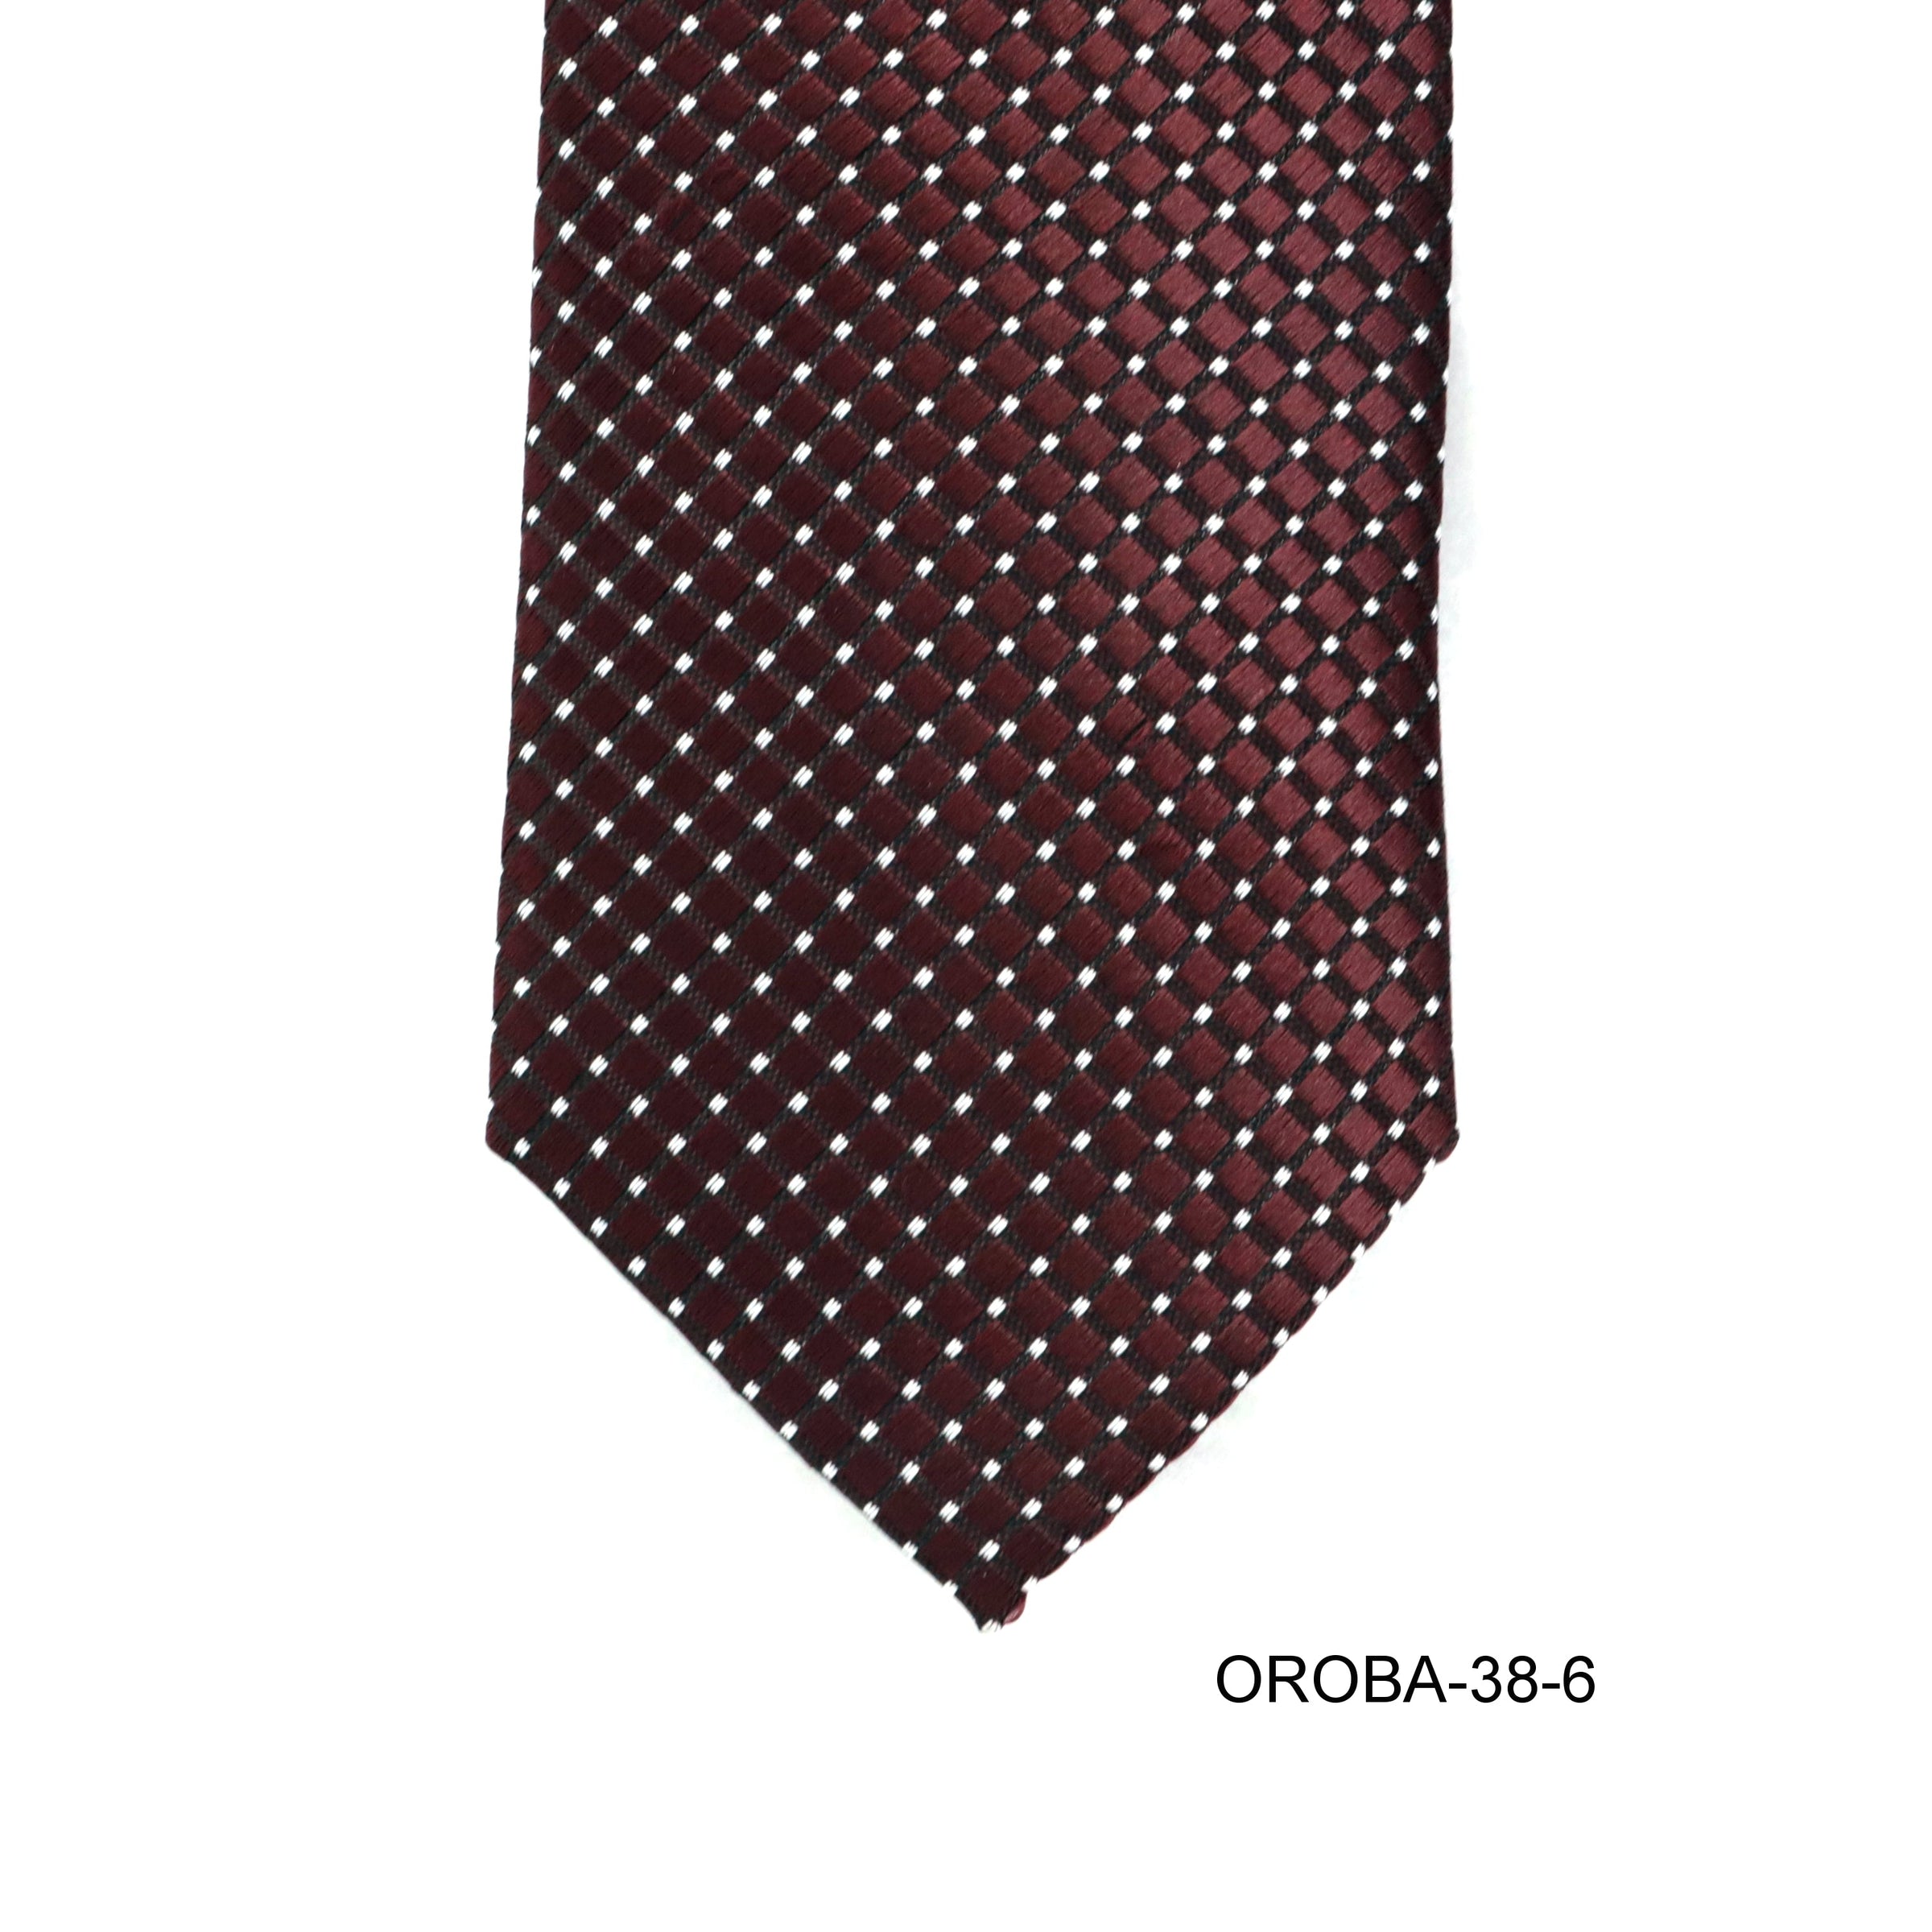 Orotie textured with Small Dots Tie in Maroon-Neckties-Orobianco-Cufflinks.com.sg